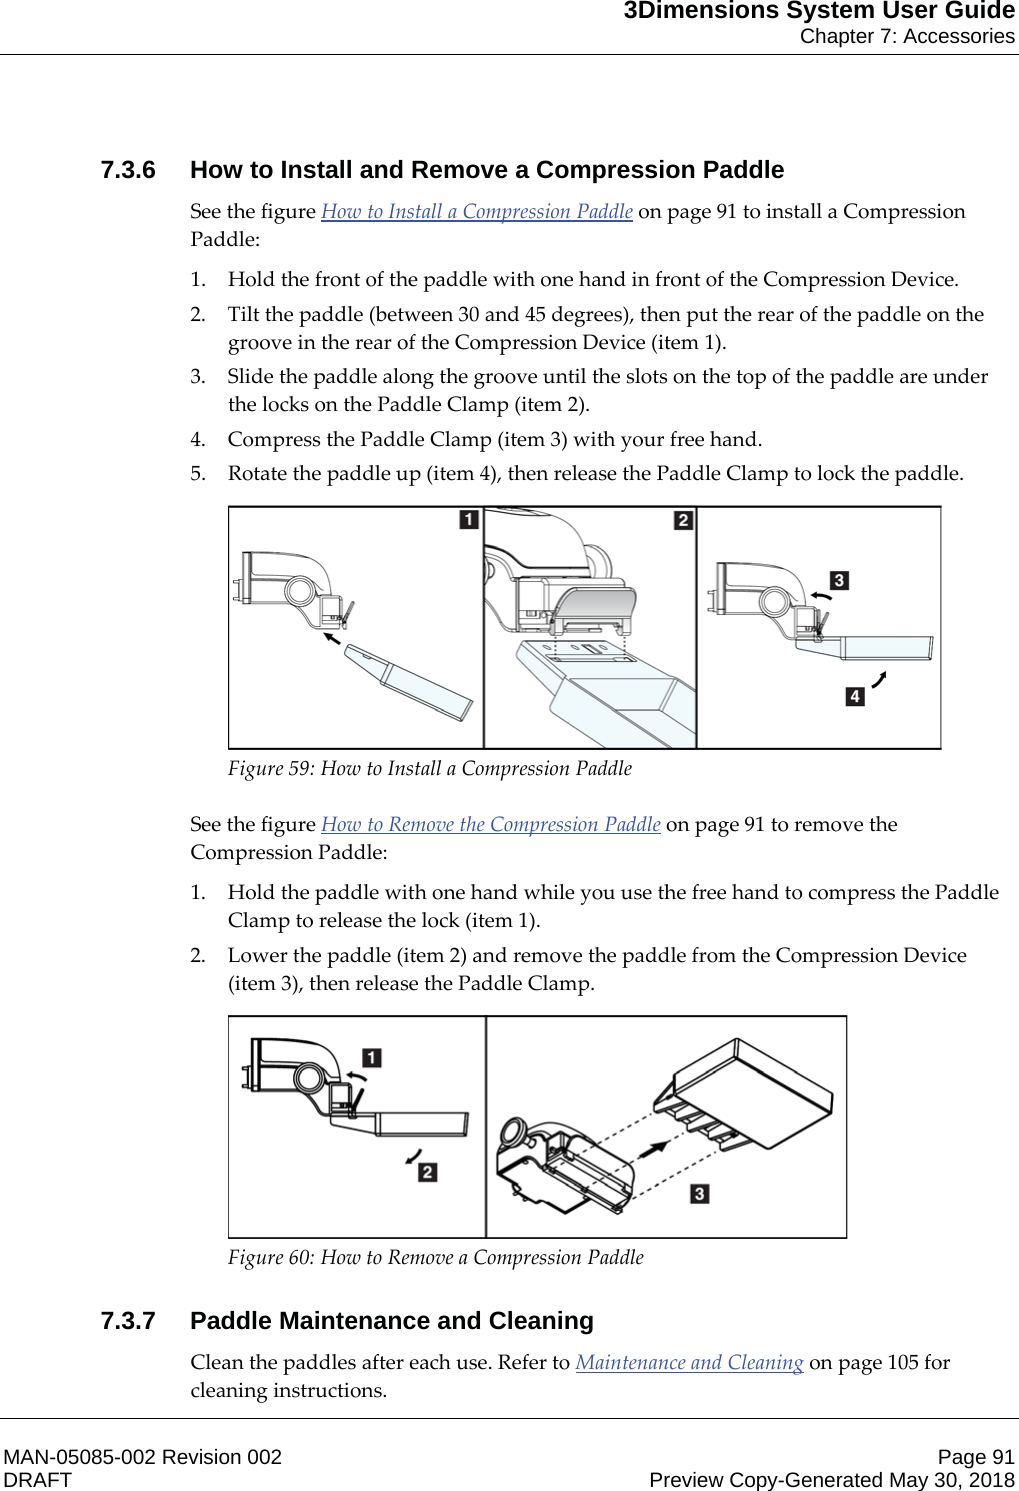 3Dimensions System User GuideChapter 7: AccessoriesMAN-05085-002 Revision 002 Page 91DRAFT Preview Copy-Generated May 30, 20187.3.6 How to Install and Remove a Compression PaddleSee the figure How to Install a Compression Paddle on page 91 to install a Compression Paddle: 1. Hold the front of the paddle with one hand in front of the Compression Device. 2. Tilt the paddle (between 30 and 45 degrees), then put the rear of the paddle on the groove in the rear of the Compression Device (item 1). 3. Slide the paddle along the groove until the slots on the top of the paddle are under the locks on the Paddle Clamp (item 2). 4. Compress the Paddle Clamp (item 3) with your free hand. 5. Rotate the paddle up (item 4), then release the Paddle Clamp to lock the paddle.  Figure 59: How to Install a Compression Paddle    See the figure How to Remove the Compression Paddle on page 91 to remove the Compression Paddle: 1. Hold the paddle with one hand while you use the free hand to compress the Paddle Clamp to release the lock (item 1). 2. Lower the paddle (item 2) and remove the paddle from the Compression Device (item 3), then release the Paddle Clamp.  Figure 60: How to Remove a Compression Paddle    7.3.7 Paddle Maintenance and CleaningClean the paddles after each use. Refer to Maintenance and Cleaning on page 105 for cleaning instructions. 